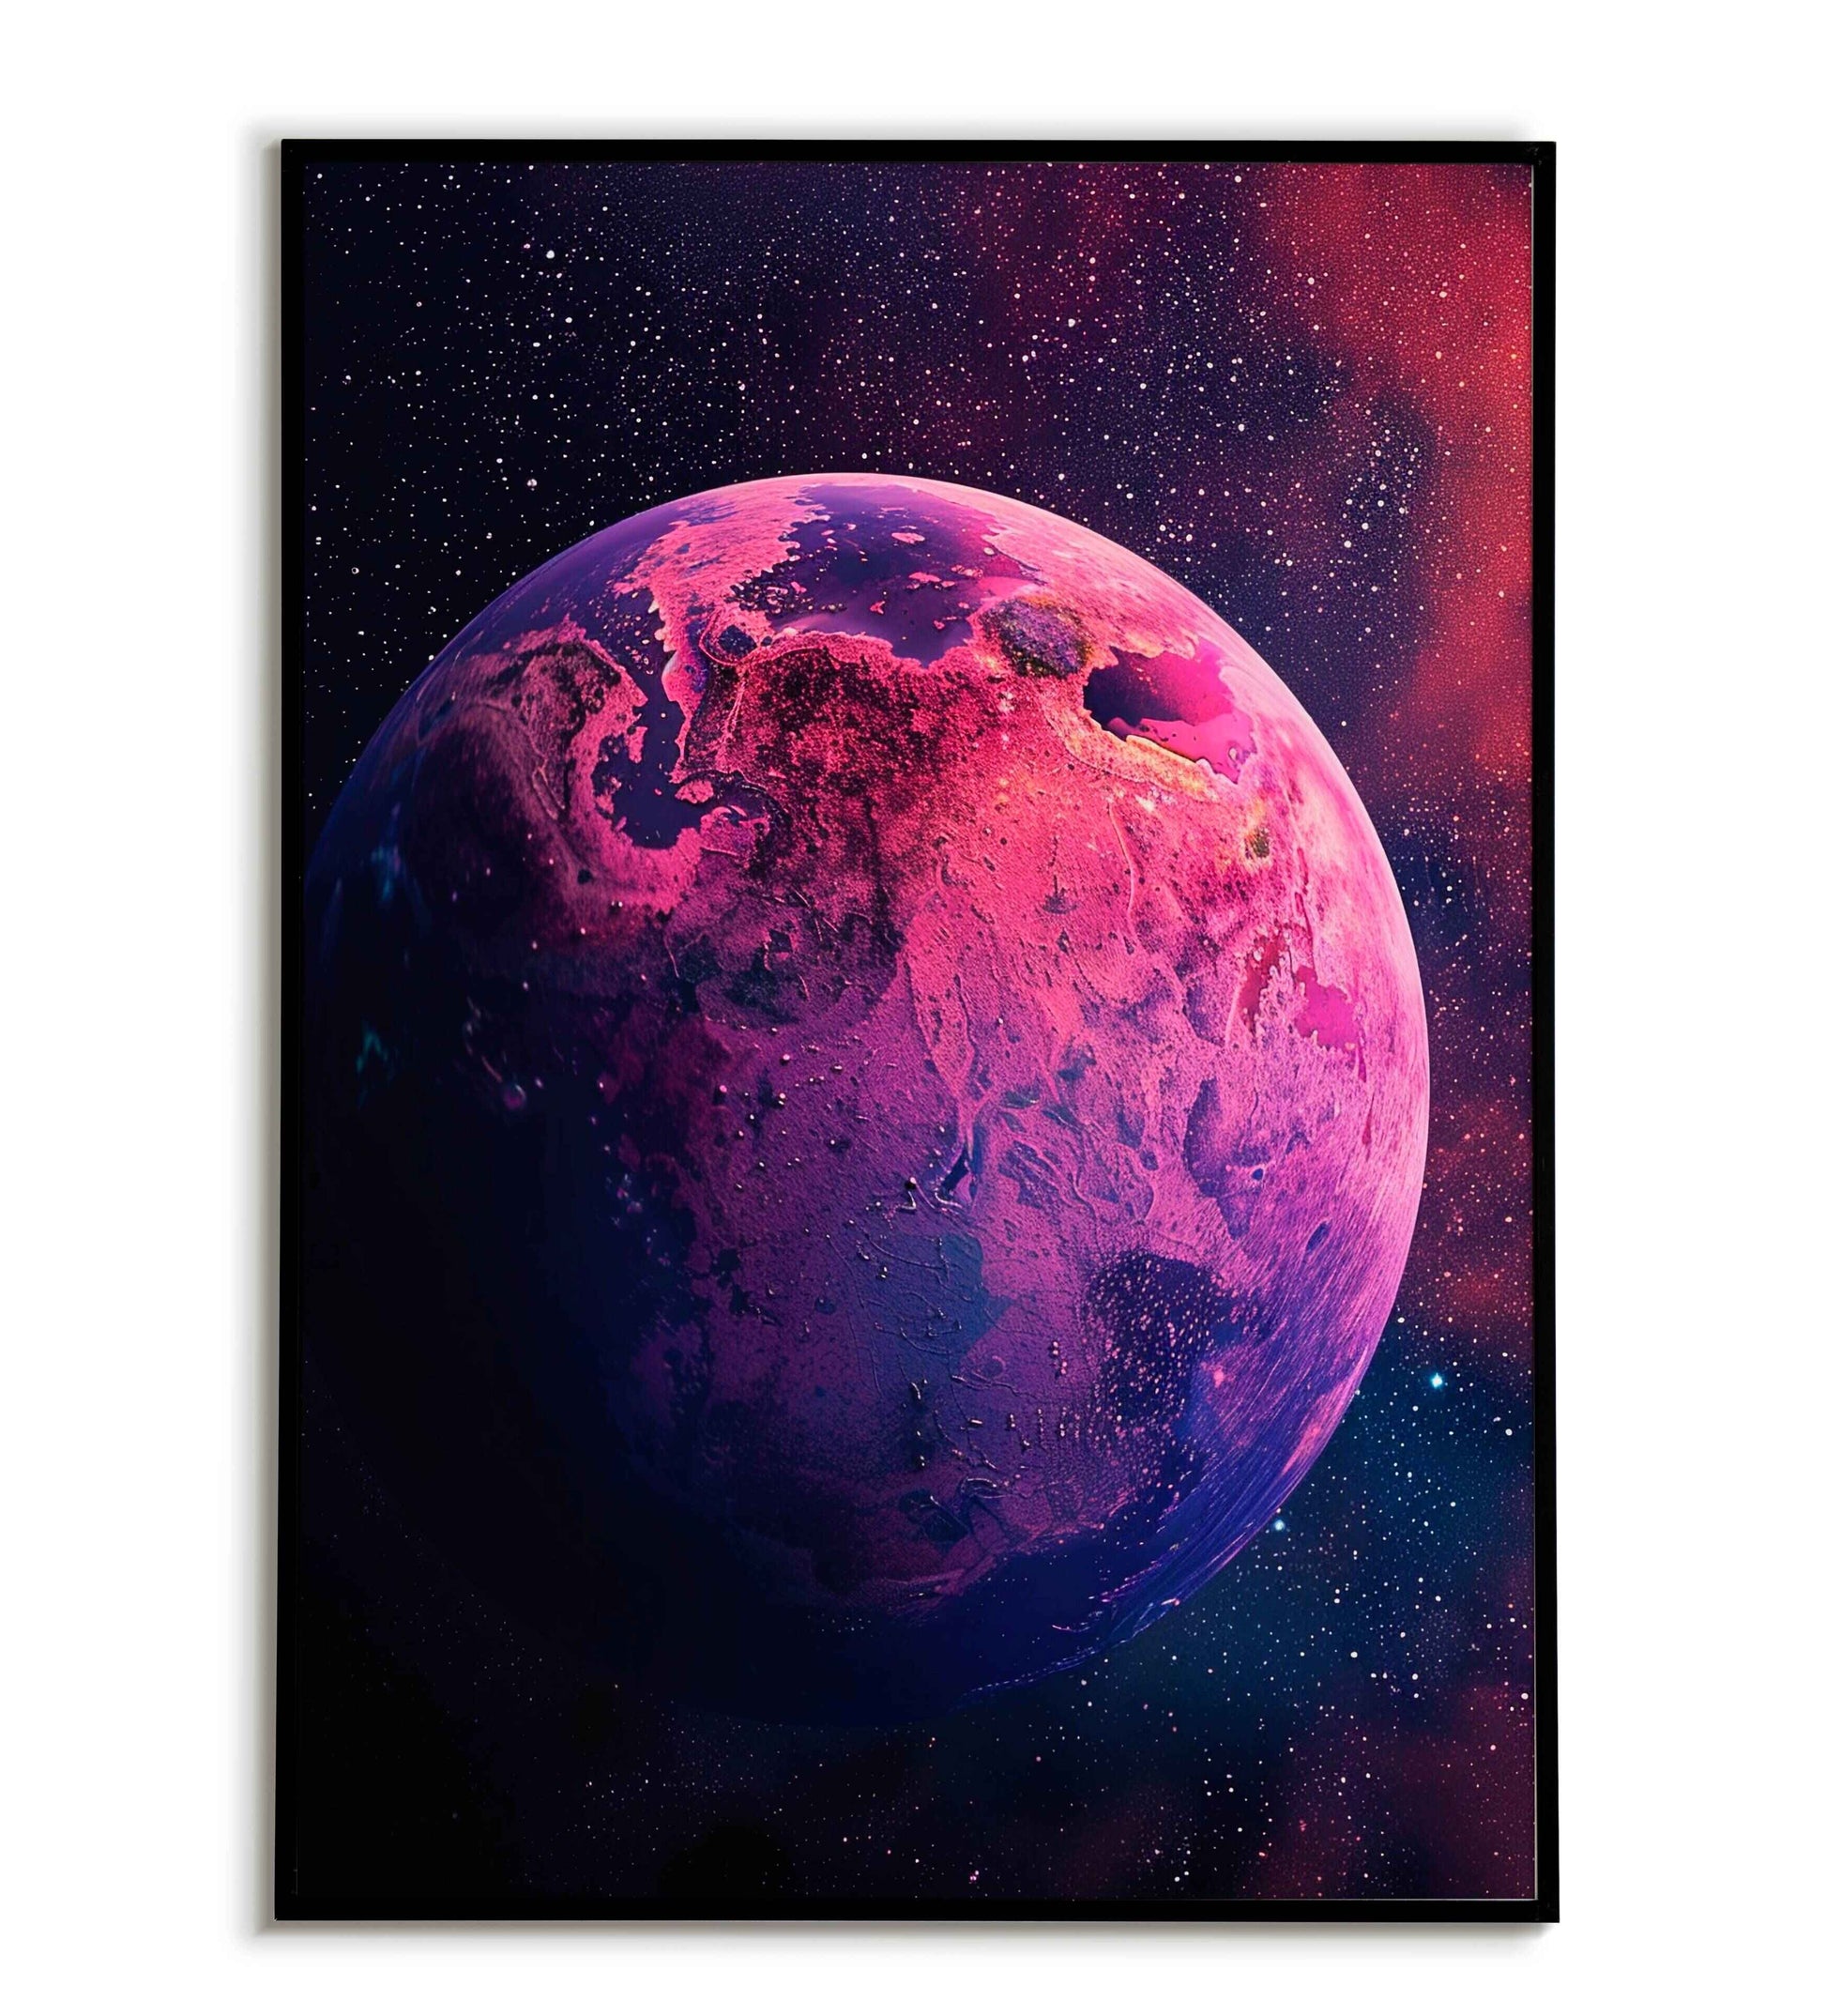 Glazed Planet printable poster. Available for purchase as a physical poster or digital download